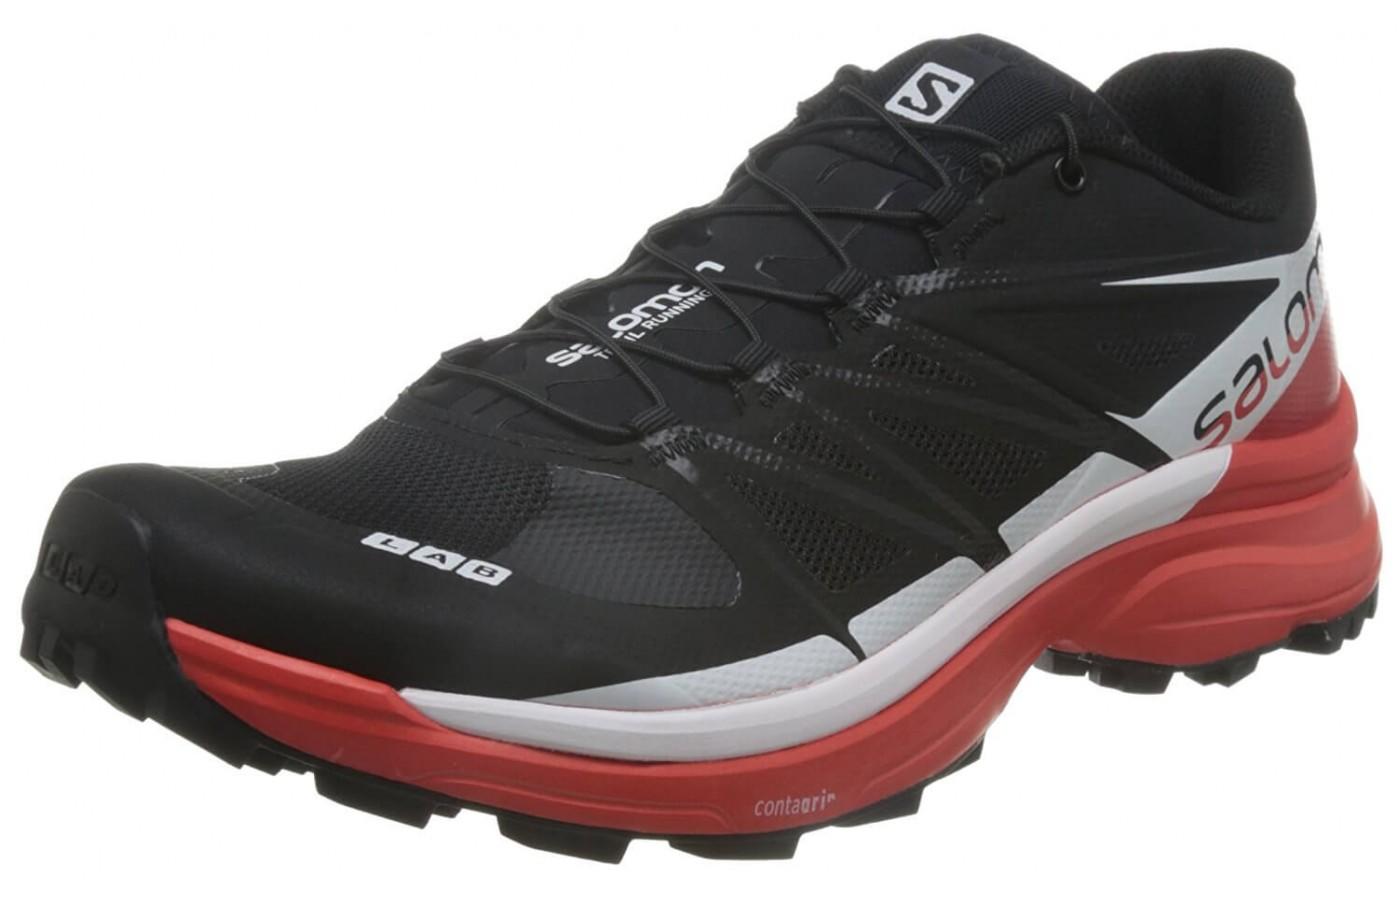 Salomon S-Lab Wings 8 SG Review - To 